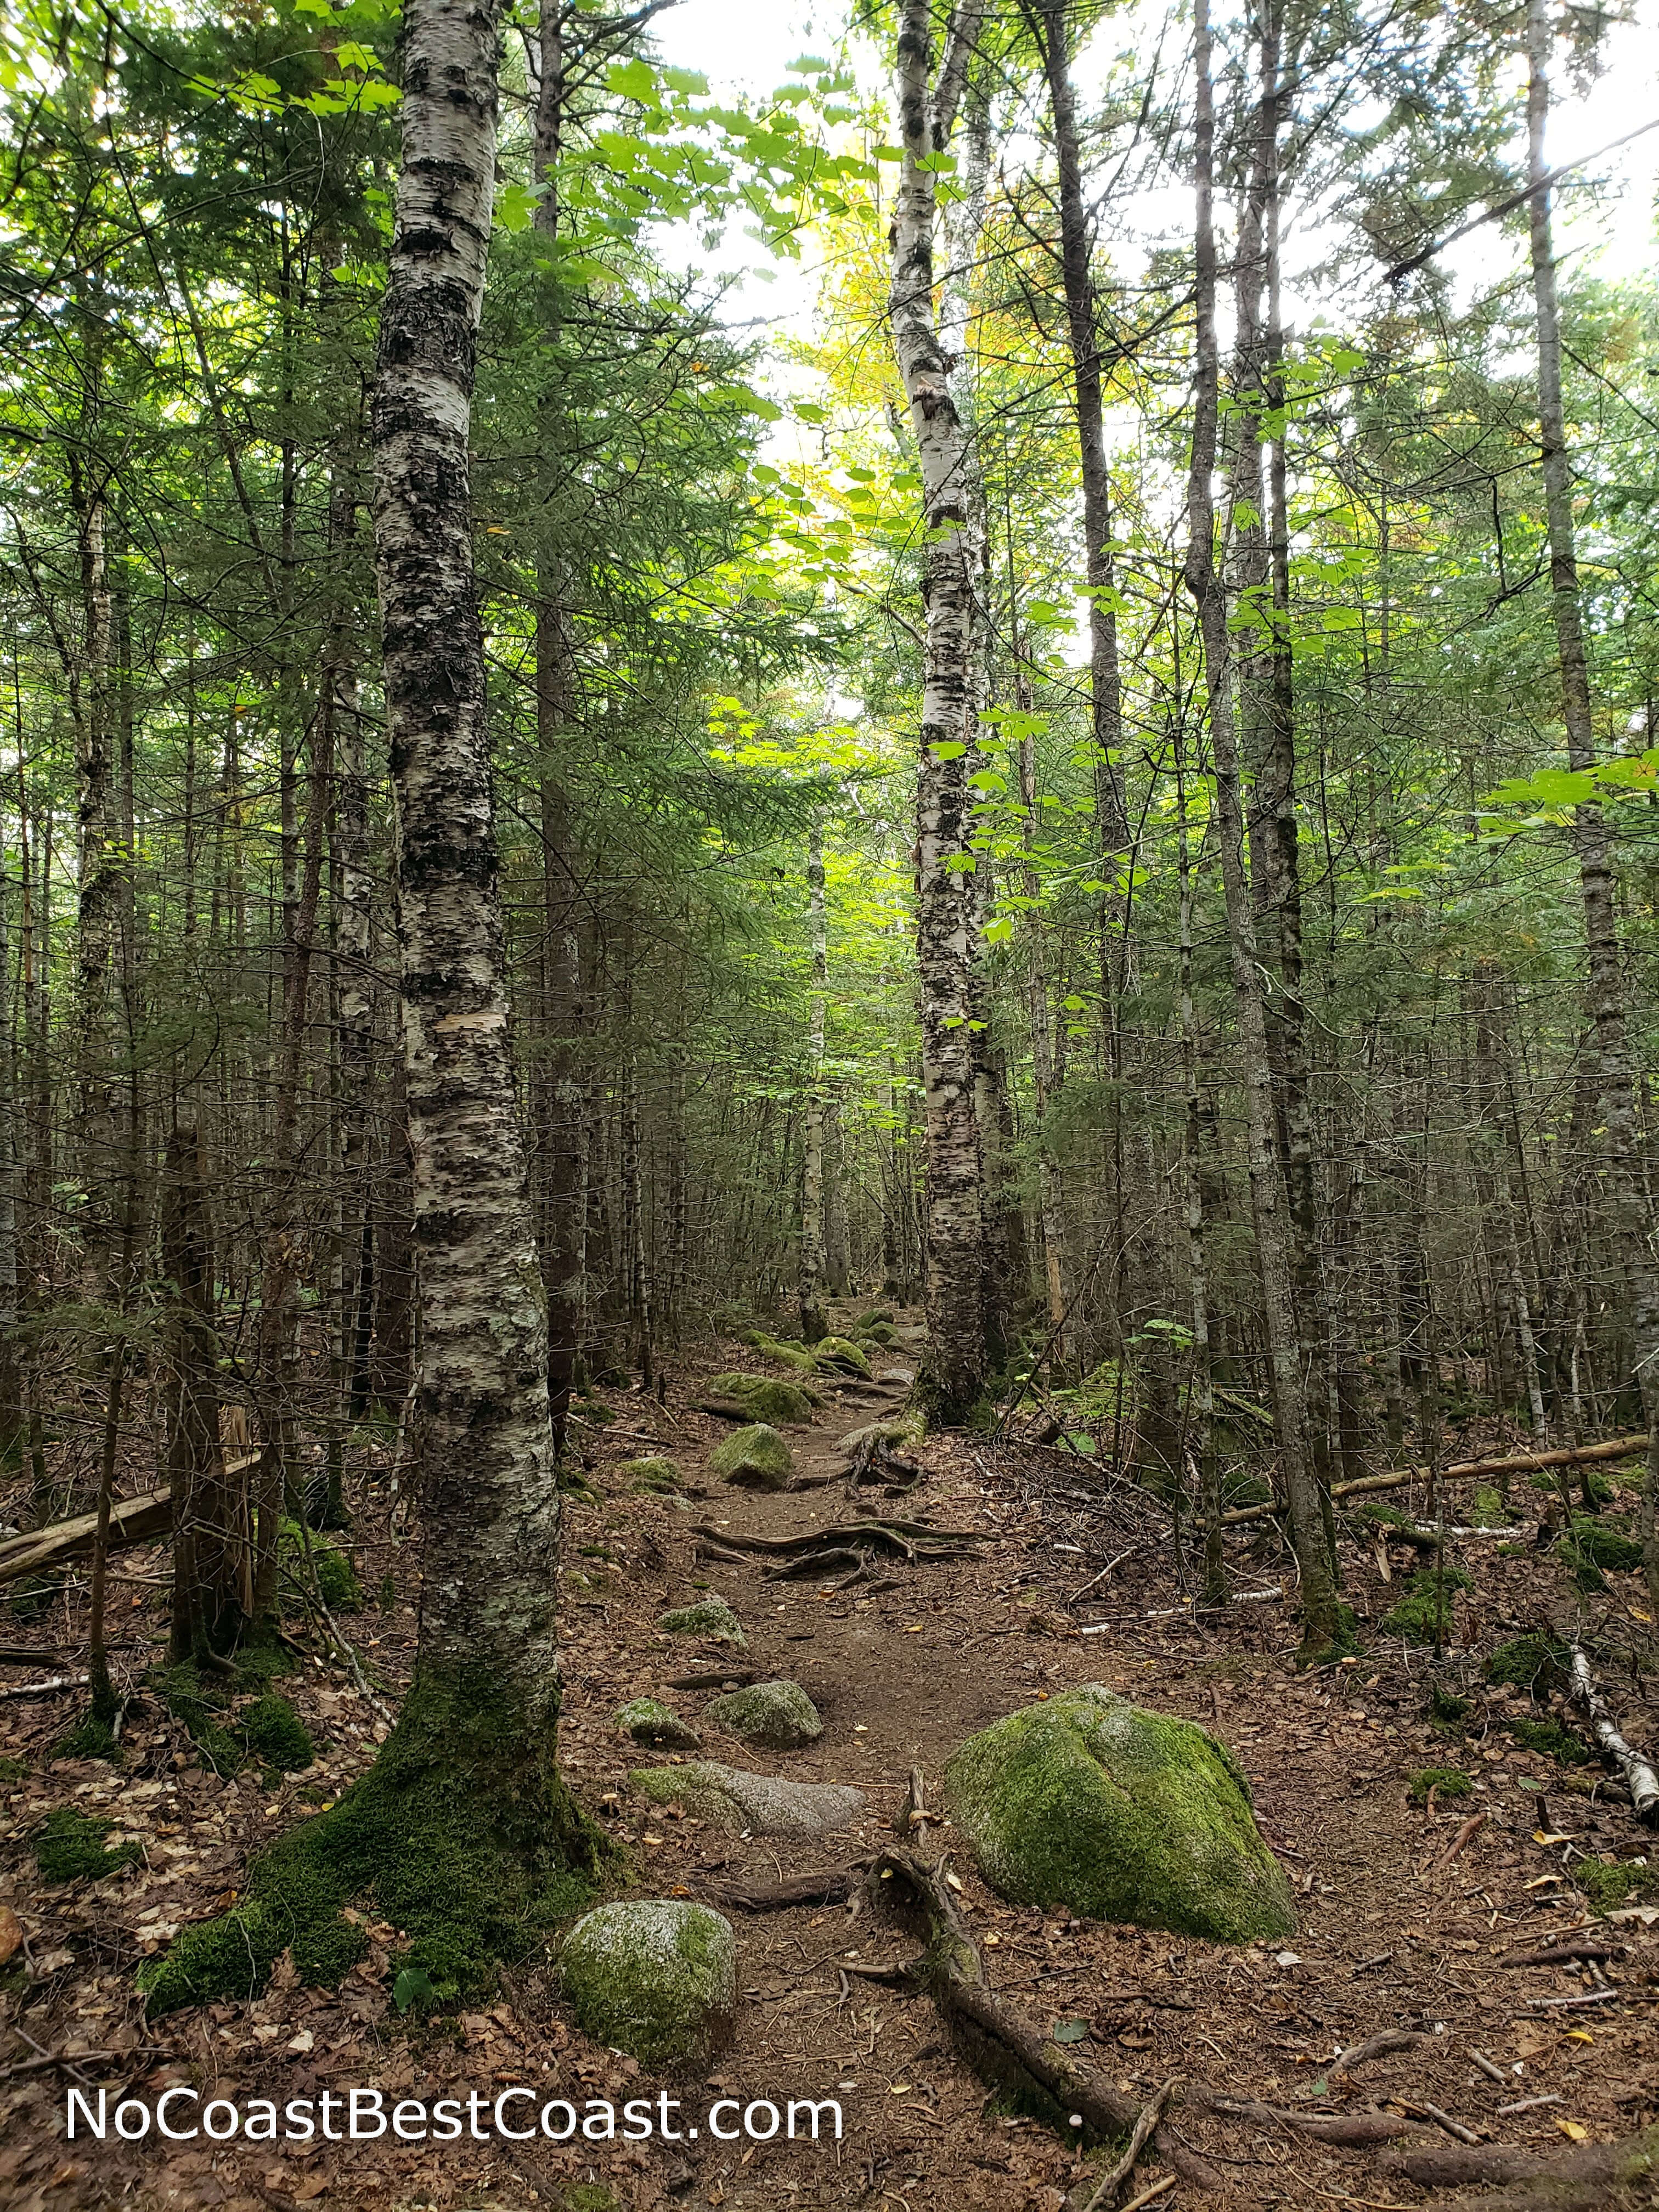 Twisted roots and mossy rocks are frequent obstacles on this section of the Appalachian Trail